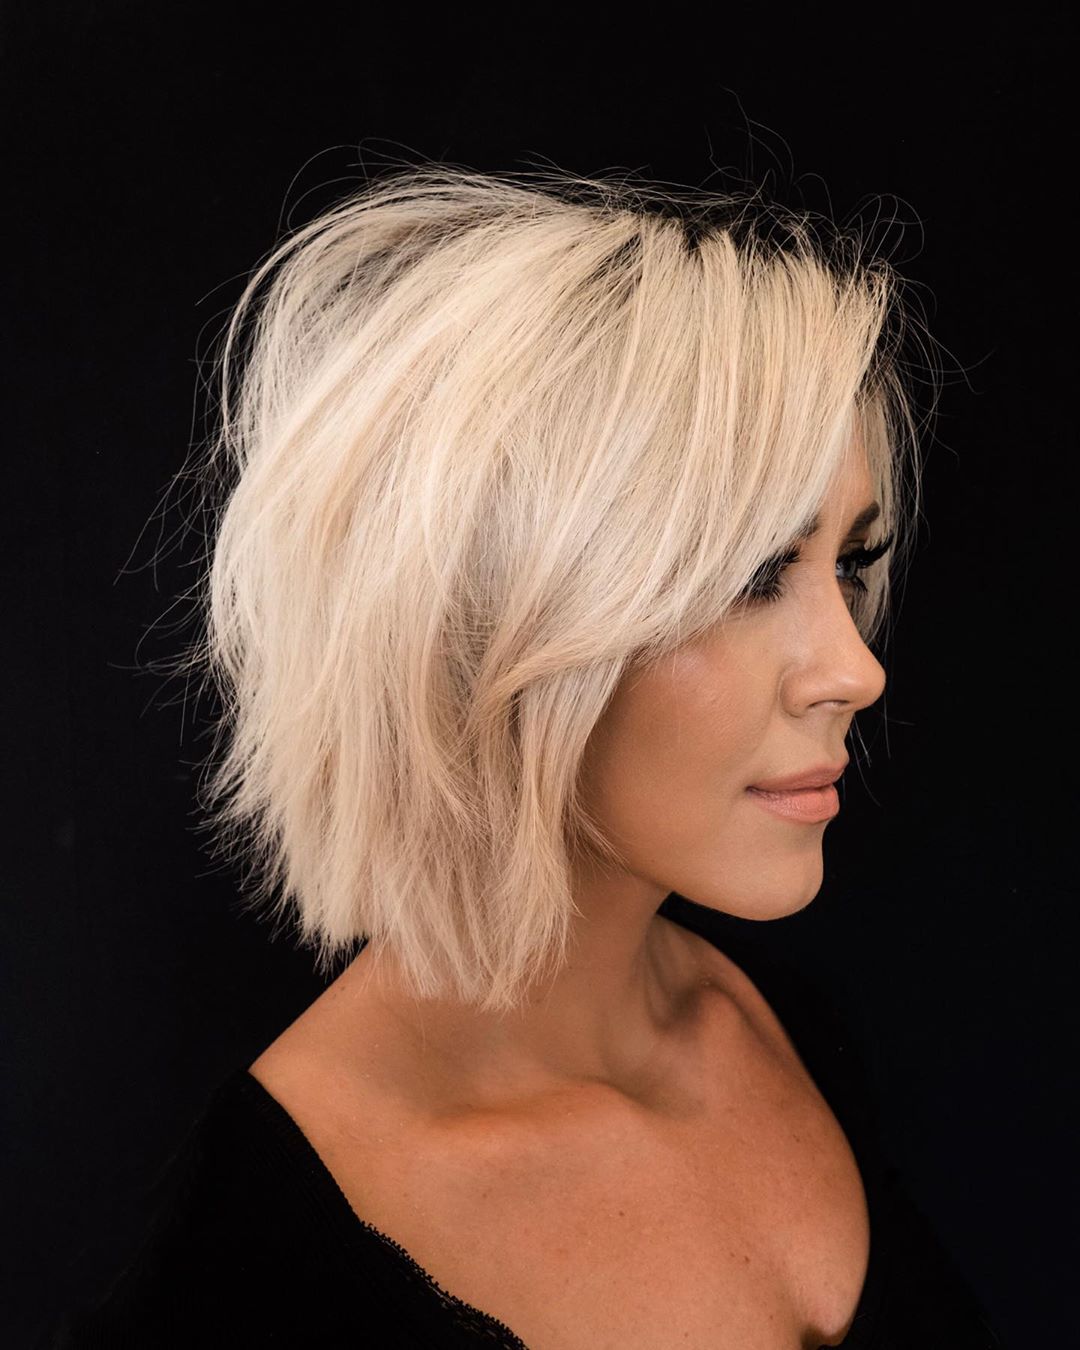 40 Best Layered Bob Hairstyle Ideas To Try In 2023 | Hair.com By L'Oréal